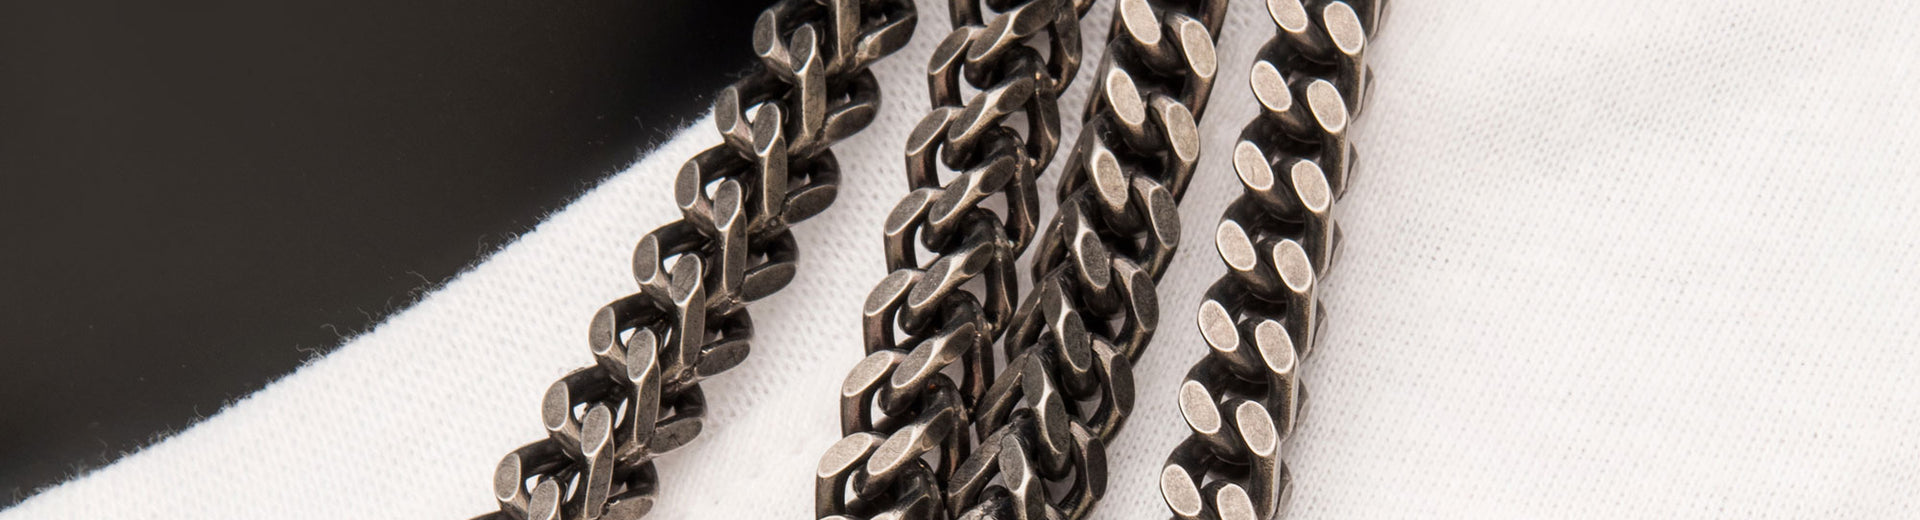 Stainless Steel 50cm Oxidized Curb Chain